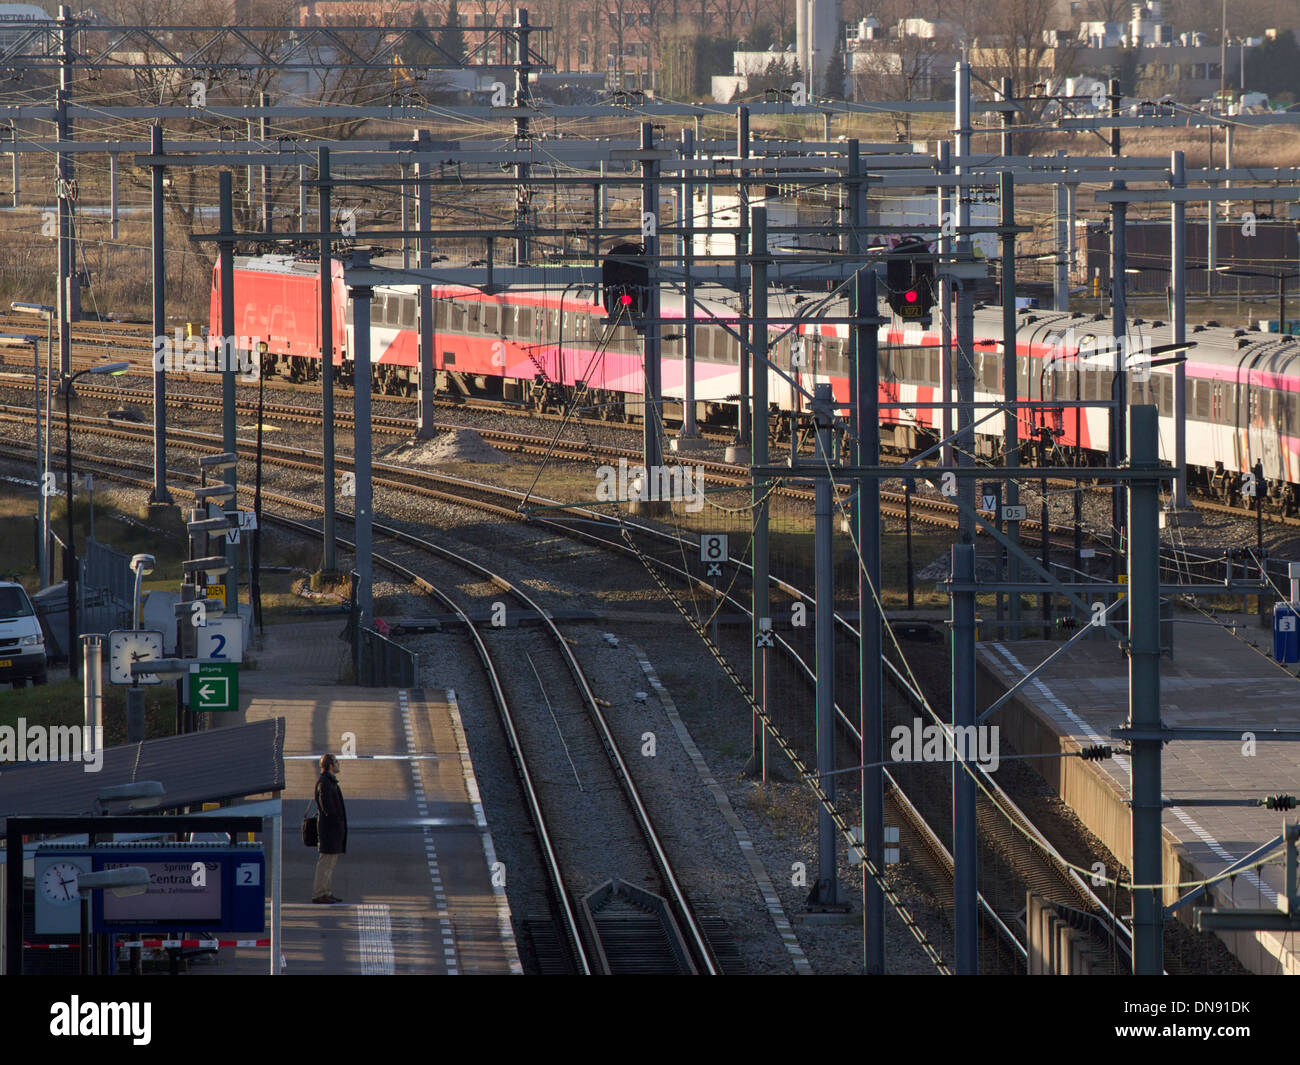 The plagued Fyra train exiting Breda central station on its way to Amsterdam. Stock Photo